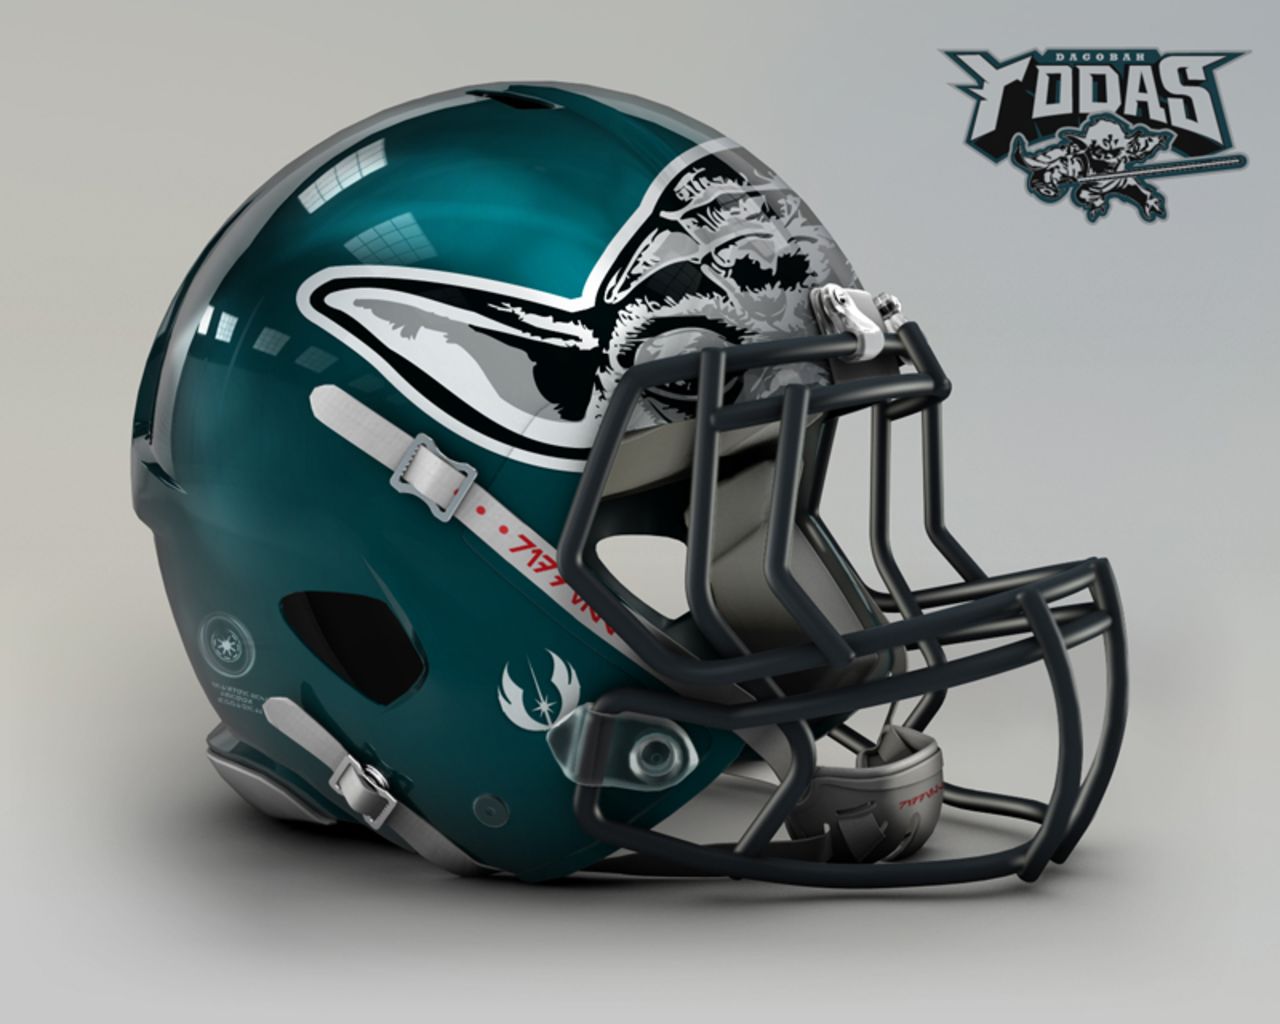 The<a href="http://www.philadelphiaeagles.com/" target="_blank" target="_blank"> Philadelphia Eagles</a> helmet design posed a challenge, brilliantly solved by using Yoda's ears in place of the eagle's wings.